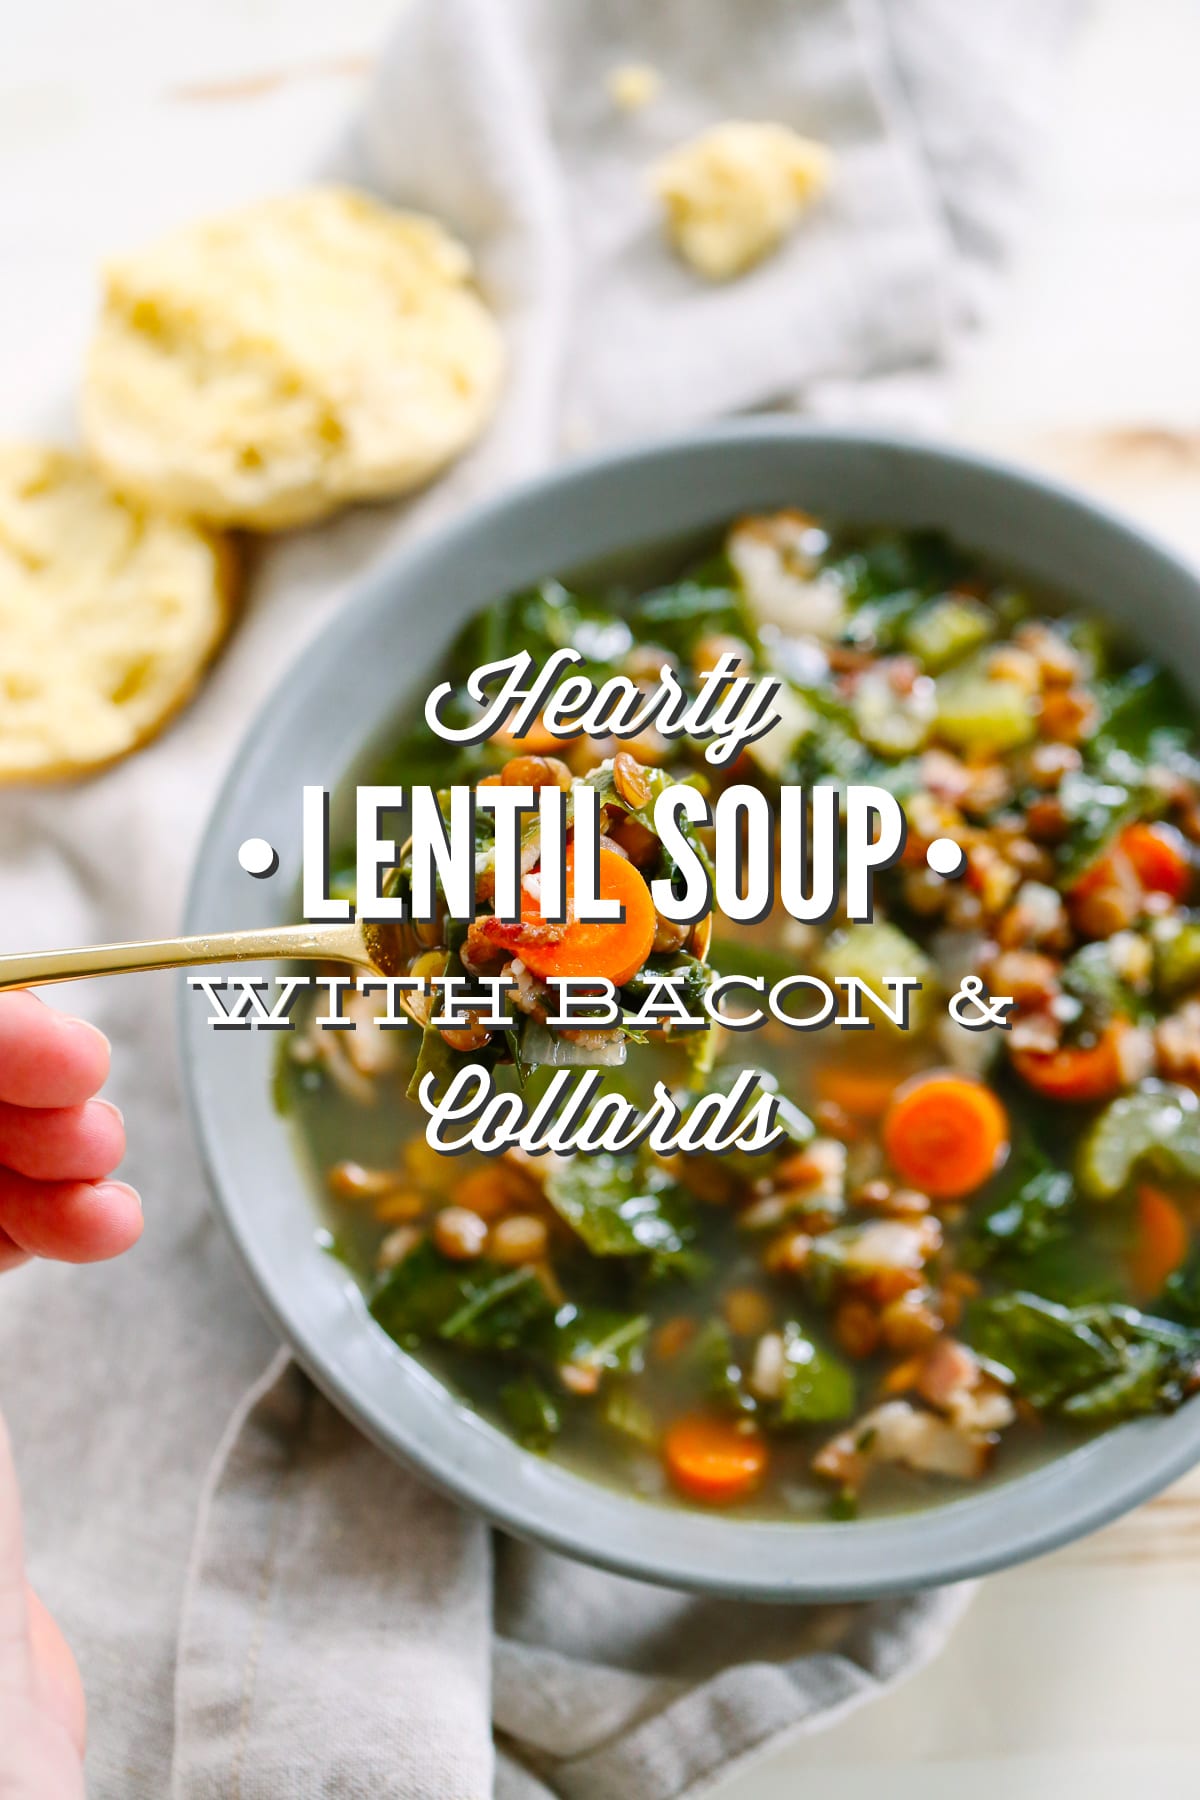 Hearty Lentil Soup with Bacon and Collards